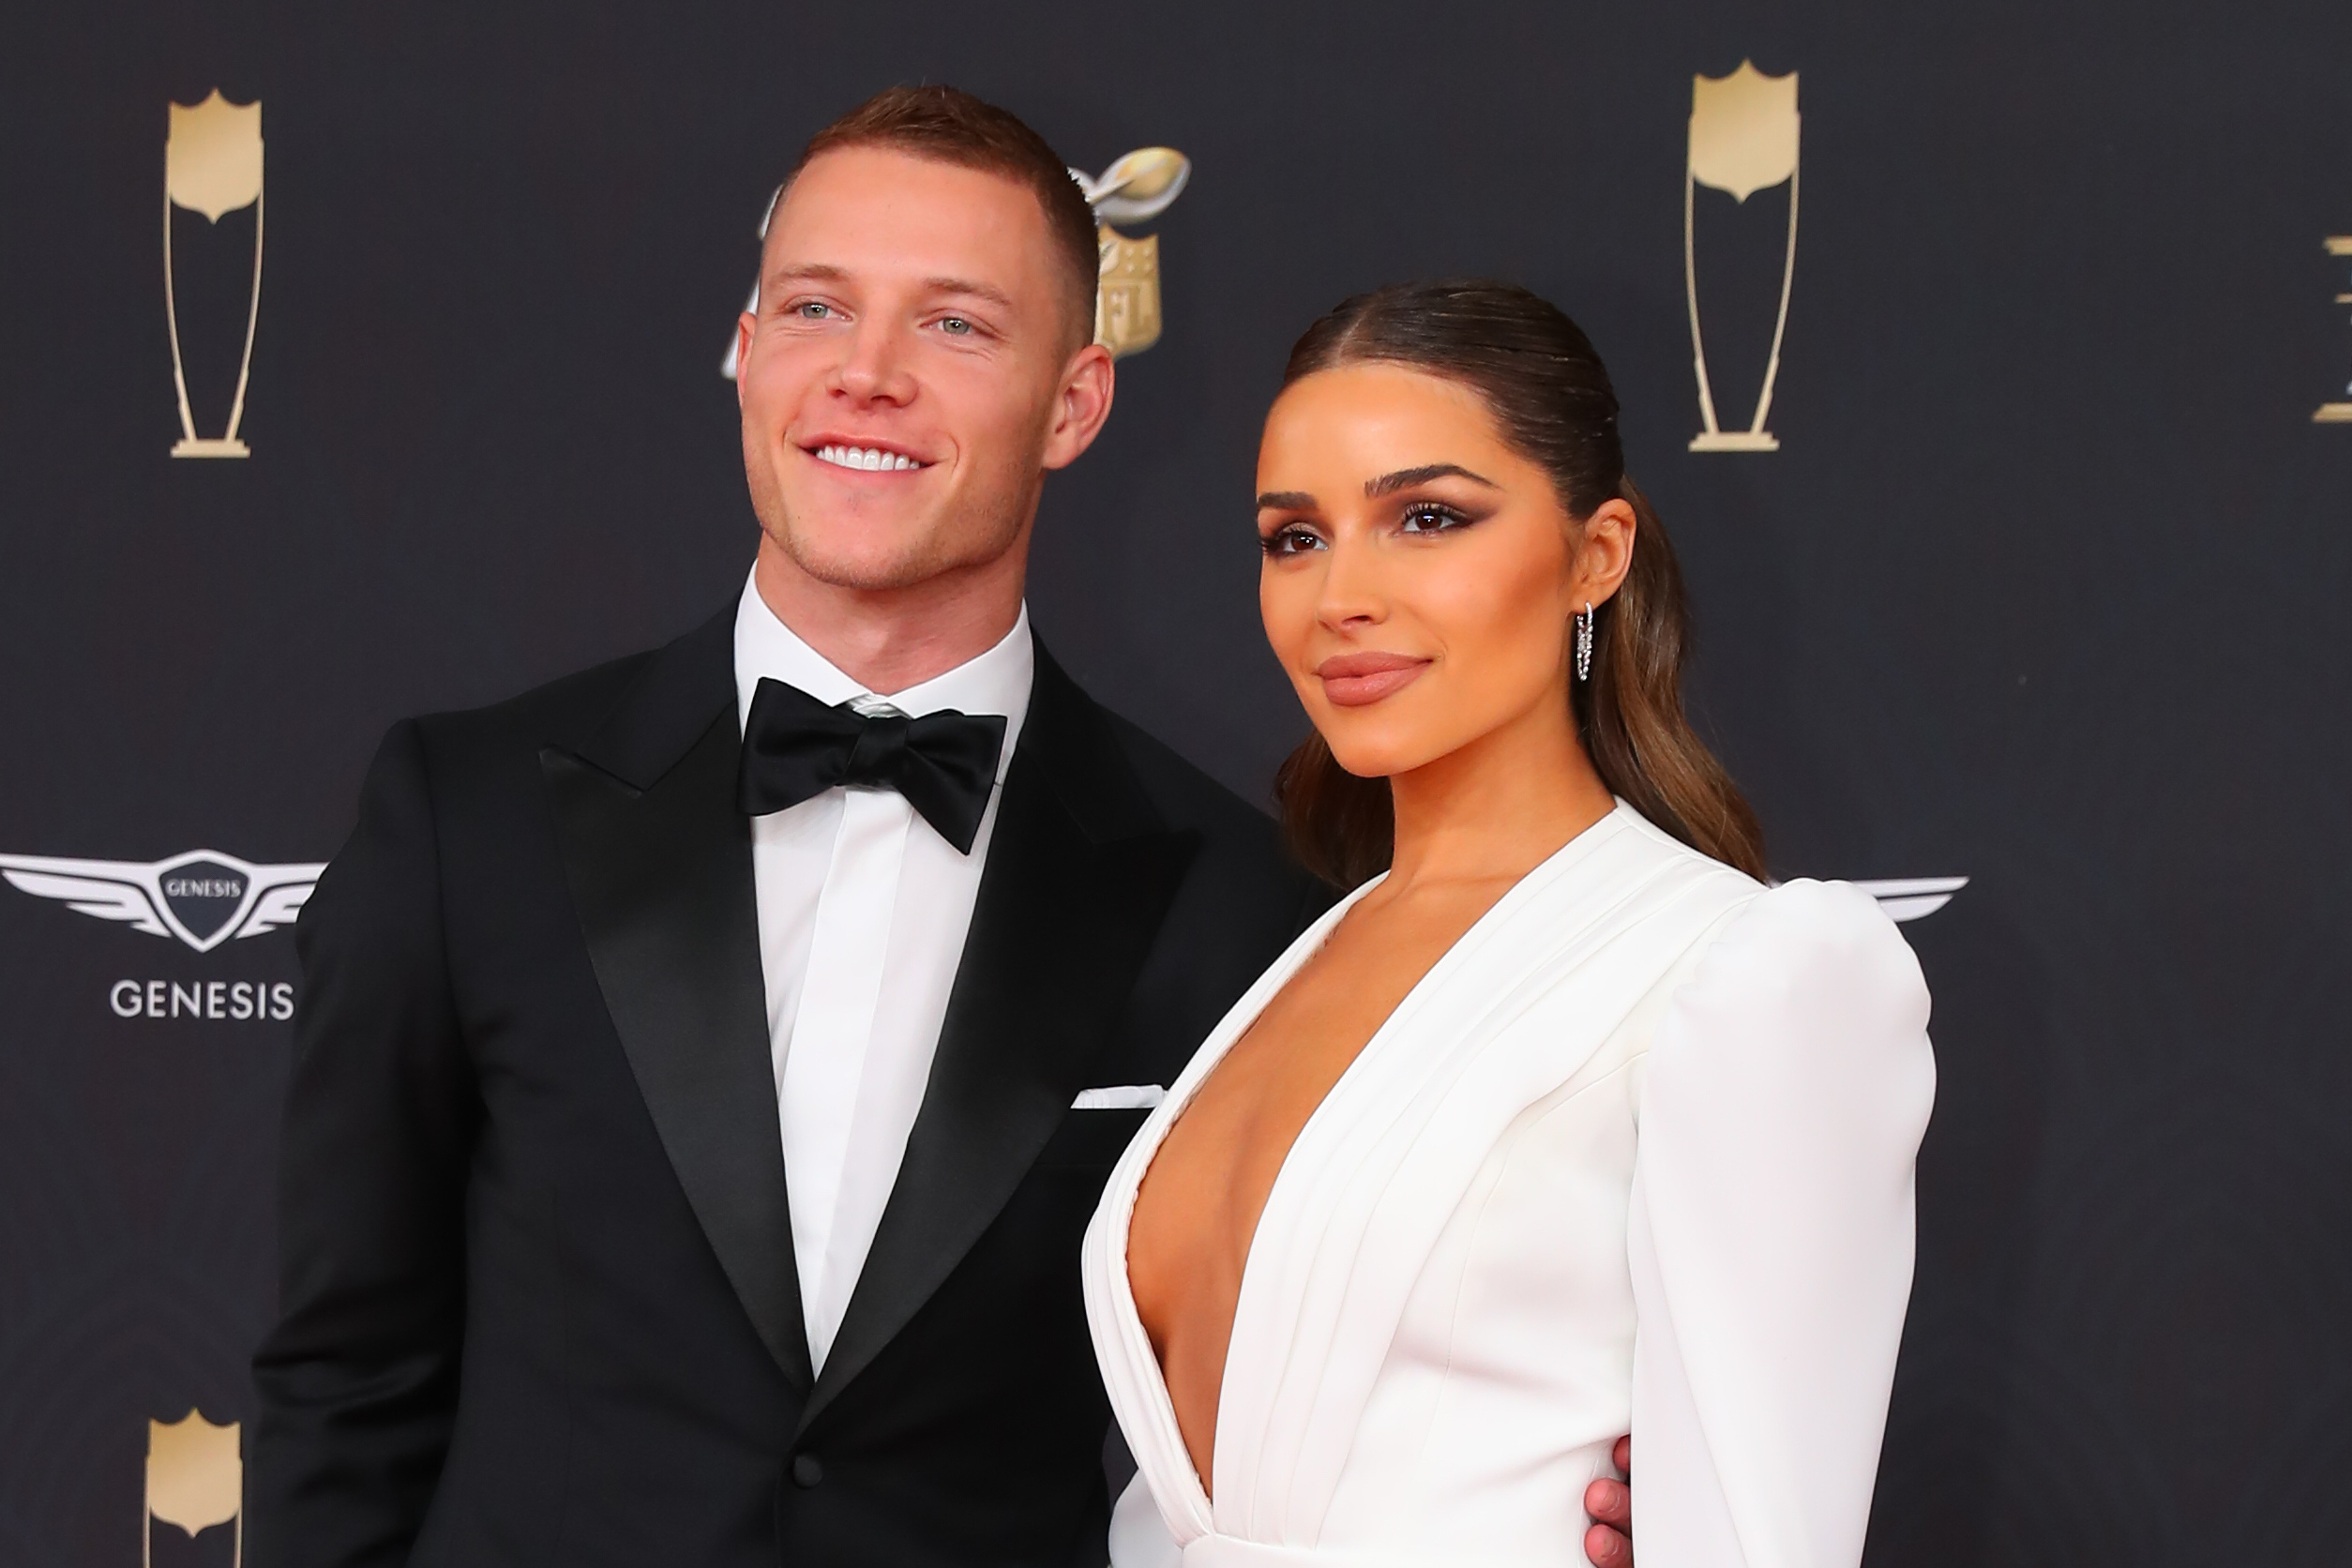 Christian McCaffrey's girlfriend Olivia Culpo is on the cover of Sports Illustrated Swimsuit Issue